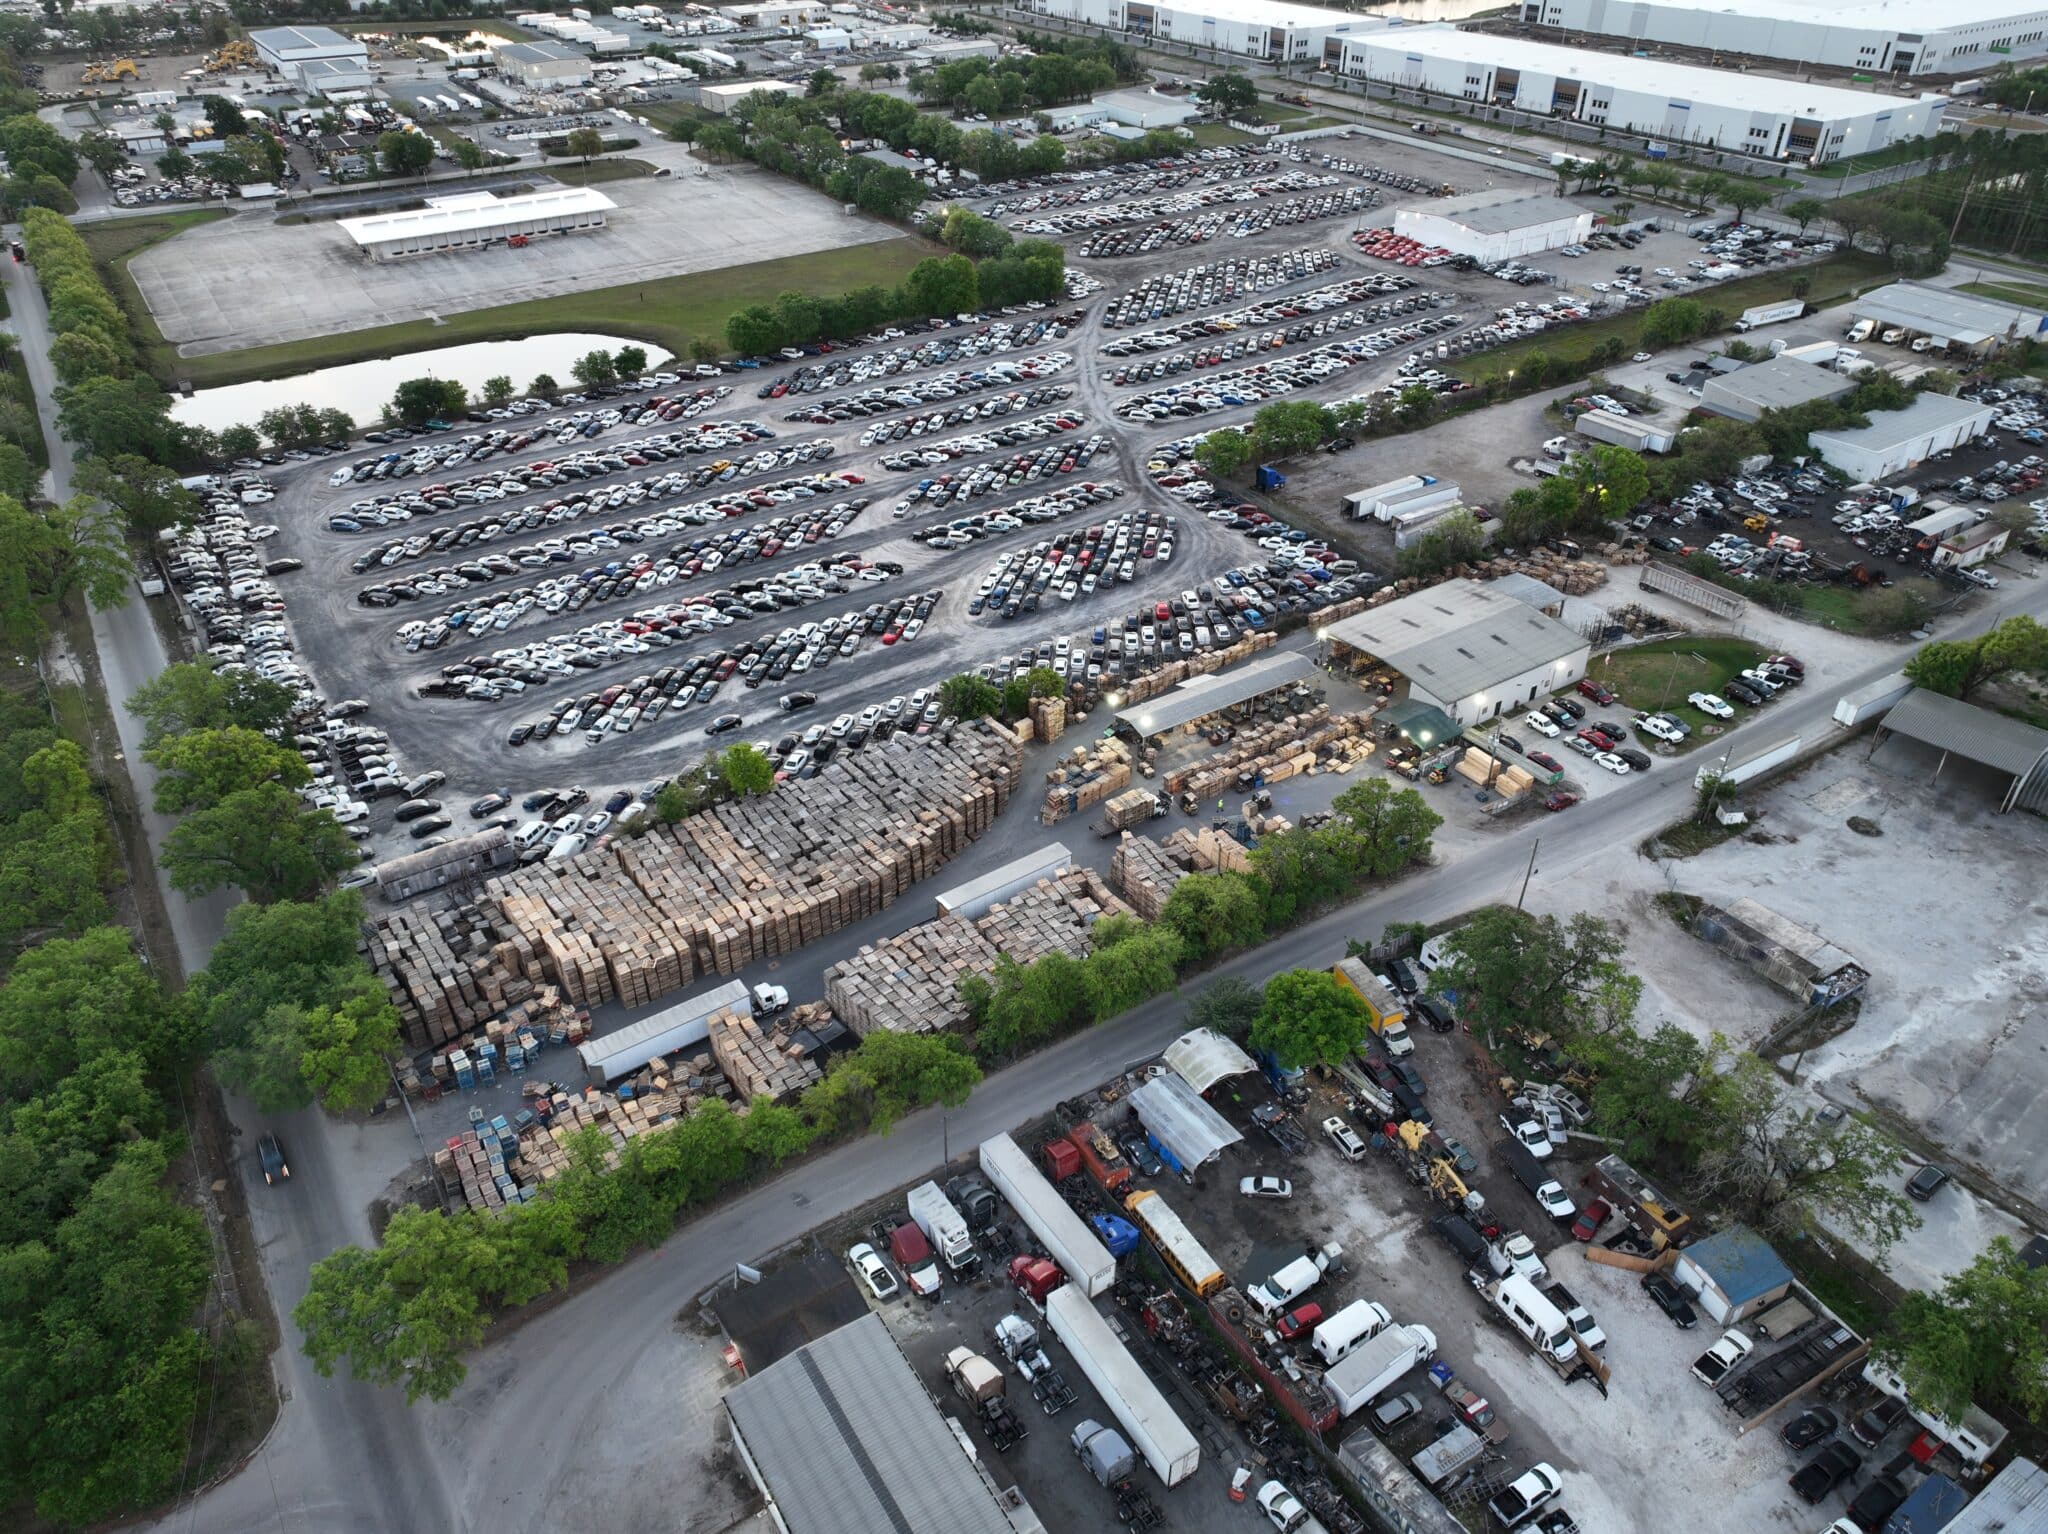 Aerial photo of the Kamps Pallets Orlando facility with many stacks of pallets